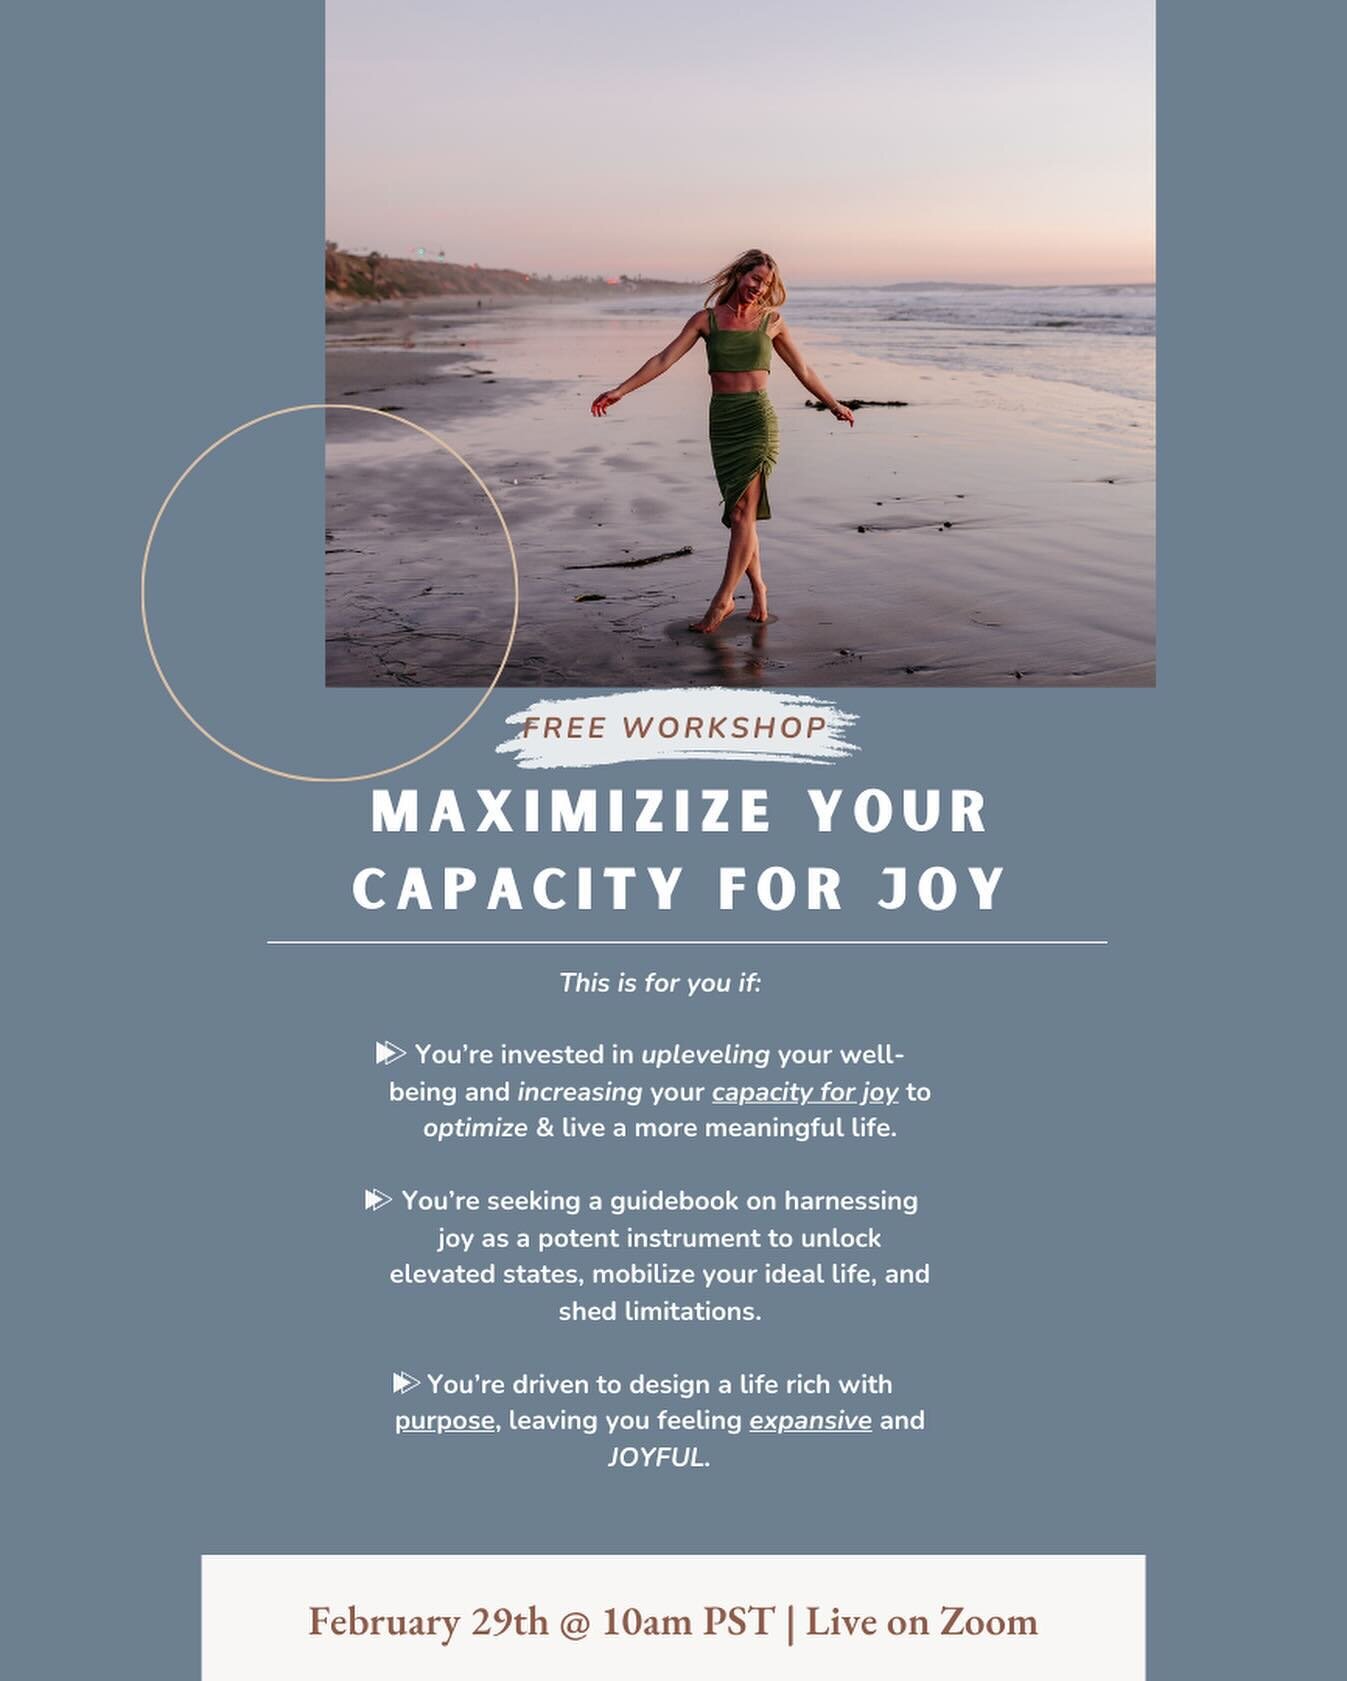 Join me on Thursday, February 29th at 10am PST for a FREE WORKSHOP on Maximizing your Capacity for Joy. 

Expect to feel expanded, clear on your next moves and how to get there, and equipped with powerful tools for your well-being toolkit. You&rsquo;